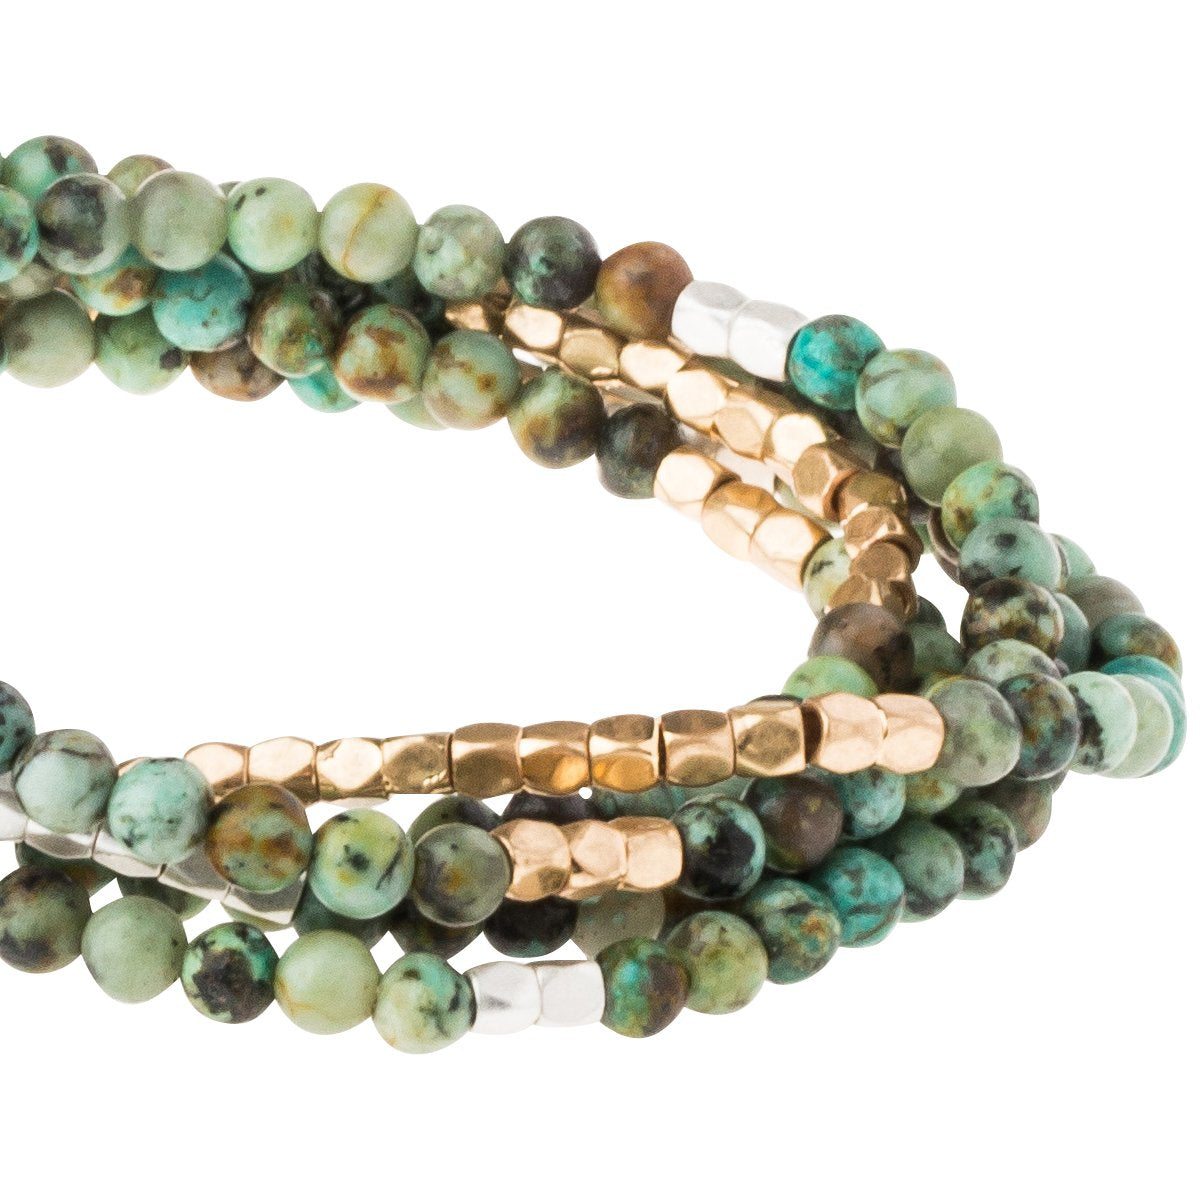 Scout® African Turquoise - Stone of Transformation Wrap Bracelet or Necklace - GRACEiousliving.com